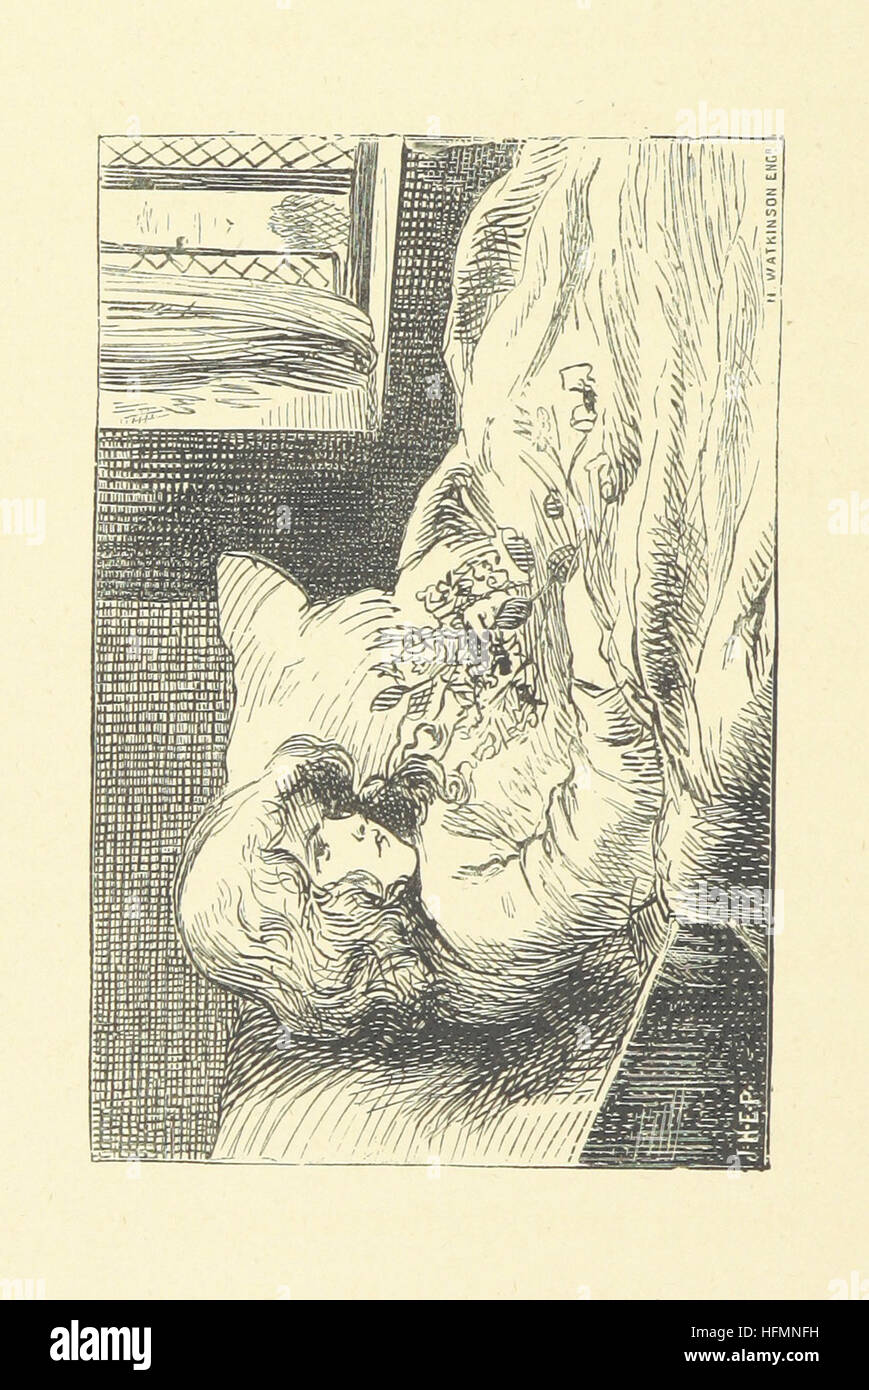 Image taken from page 38 of '[Eawr Bessy. Poem. (Extracted from After-Business Jottings.)]' Image taken from page 38 of '[Eawr Bessy Poem (Extracted Stock Photo